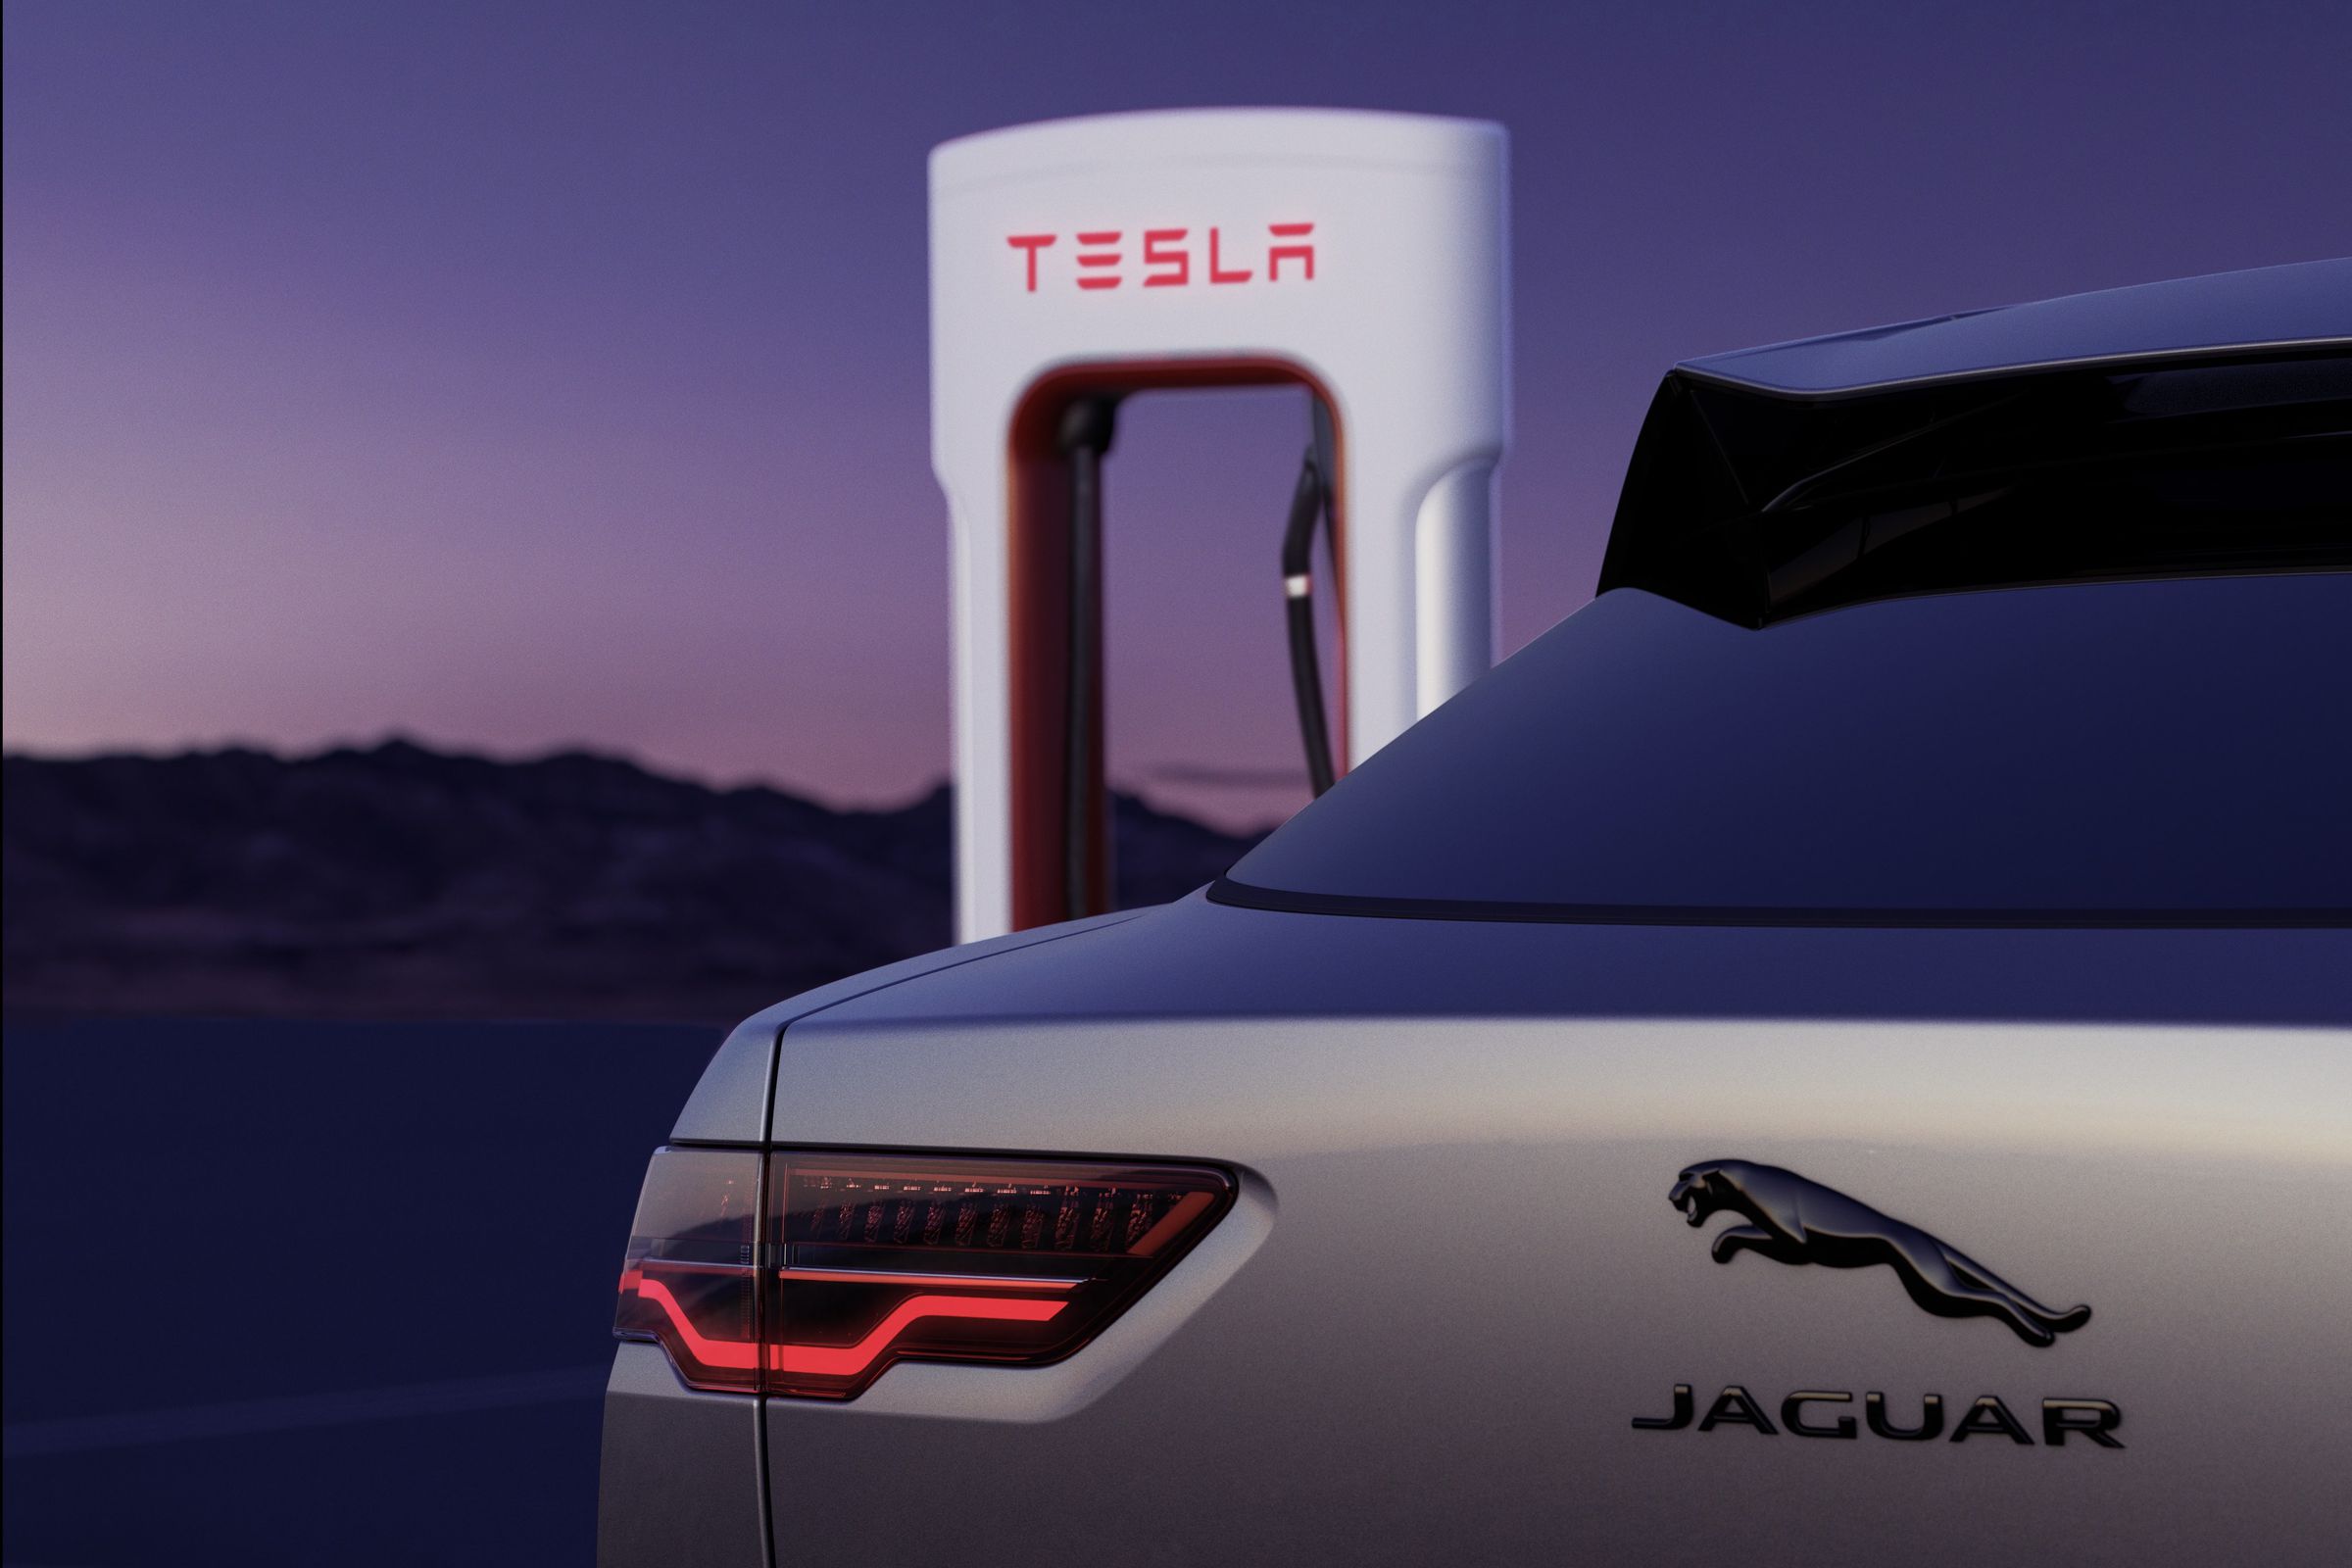 a jaguar vehicle parked in front of a tesla supercharger stall